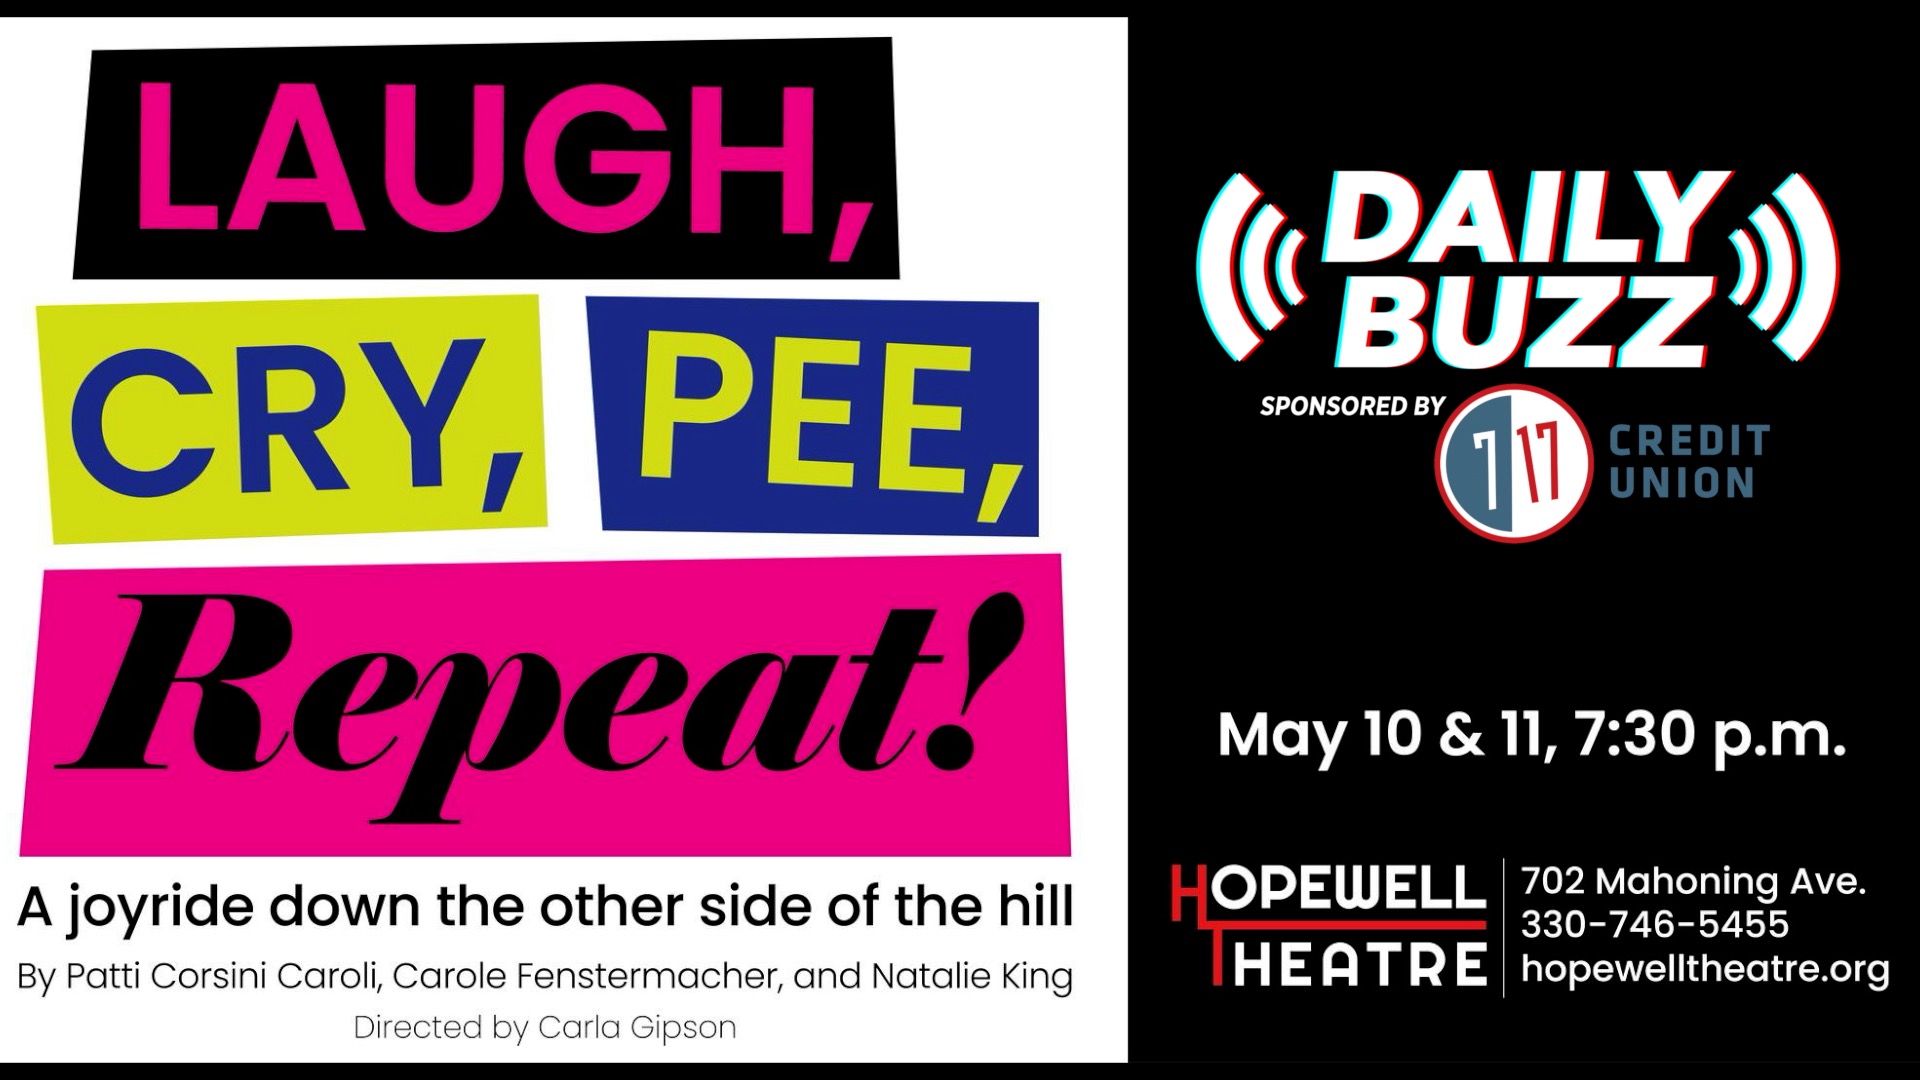 'Laugh, Cry, Pee, Repeat' at the Hopewell Theatre